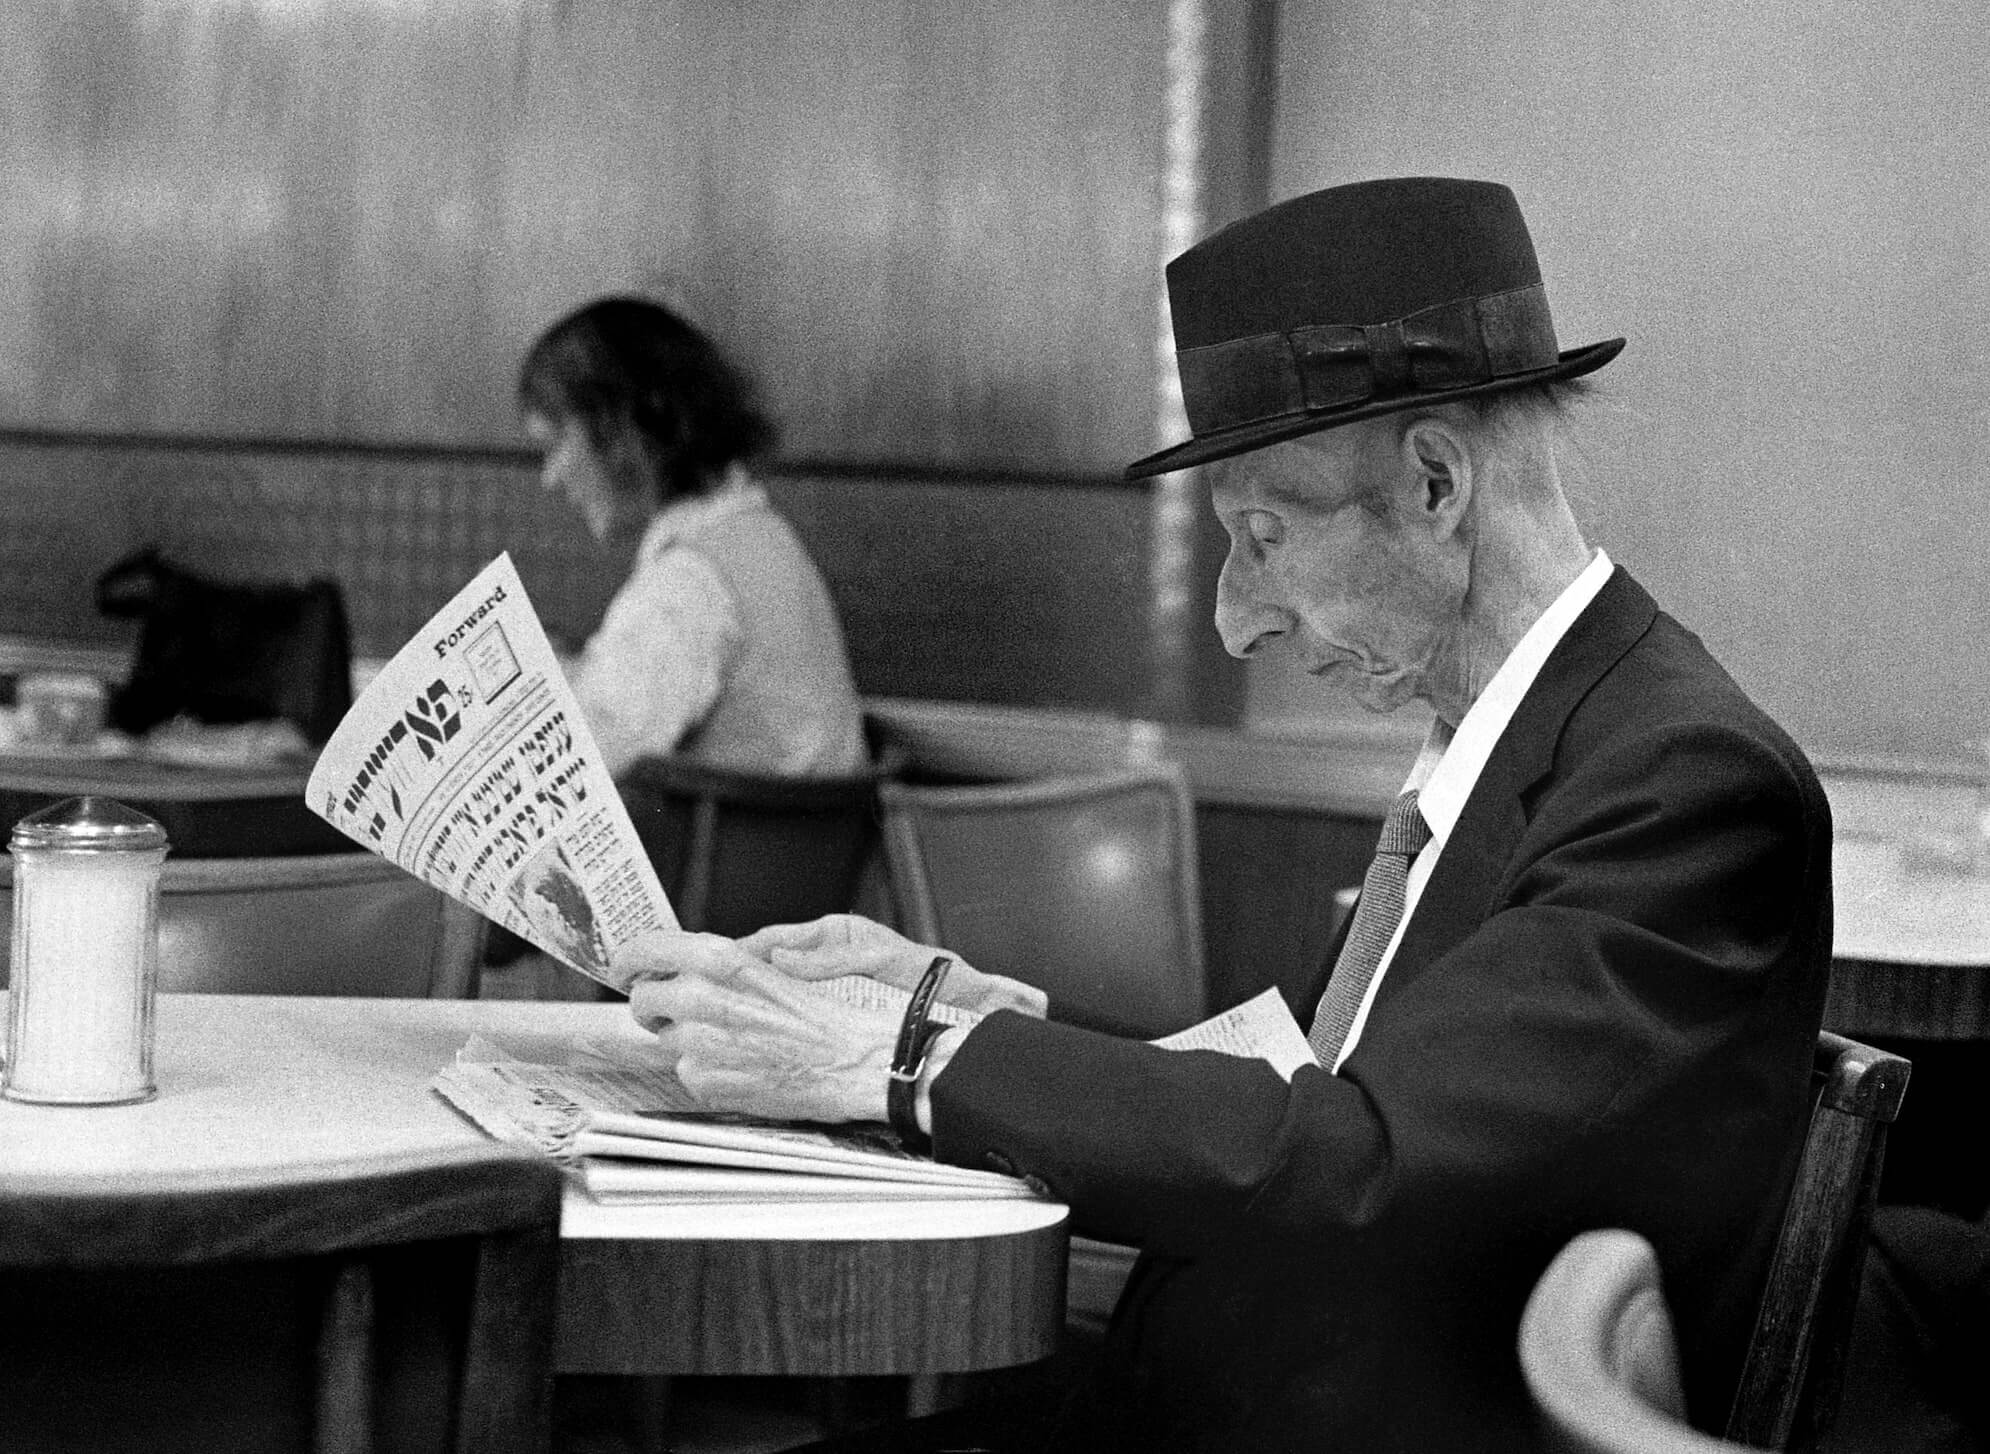 Seated at a table inside Dubrow's cafeteria, an elderly man in a suit and black hat reads a copy of the Yiddish Forverts.